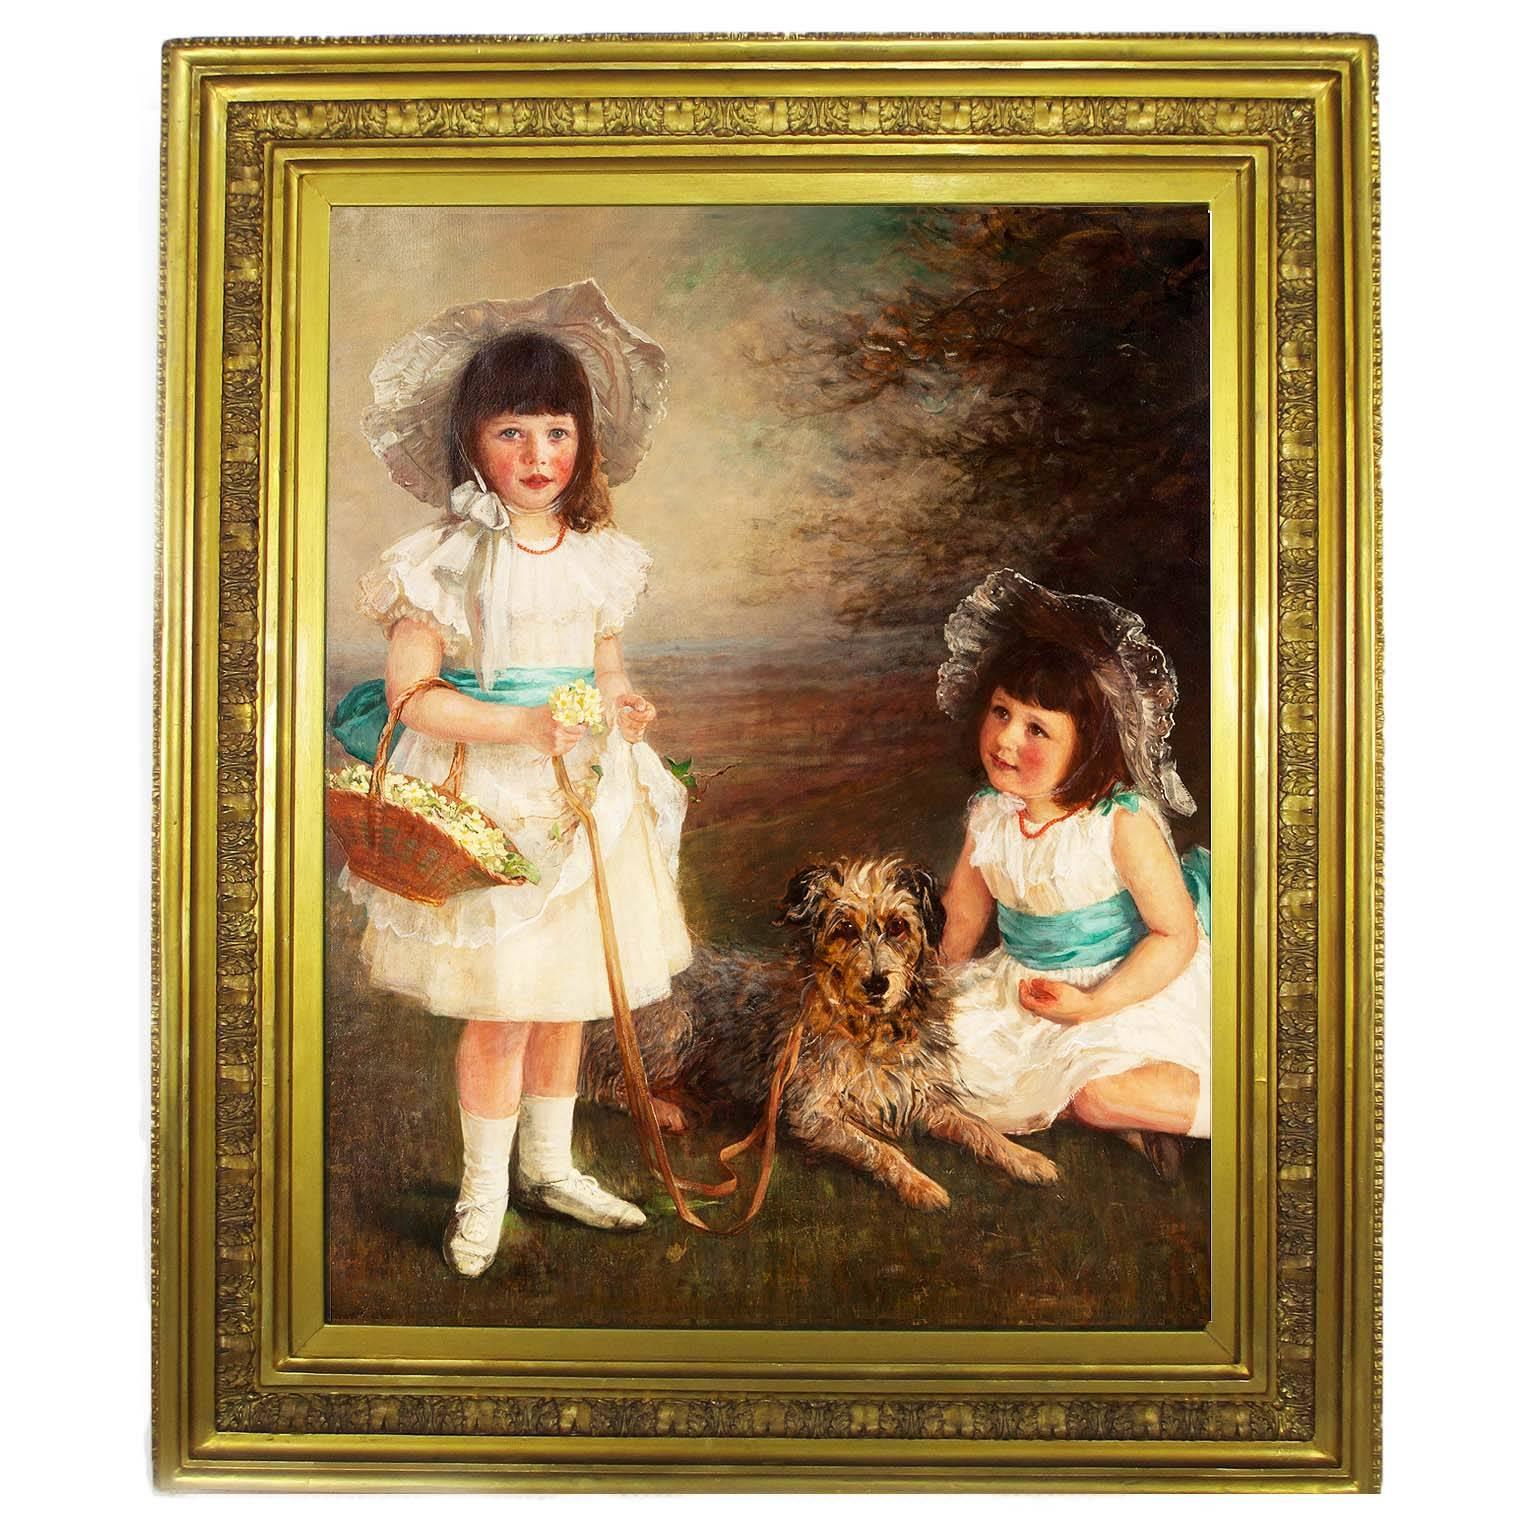 A very fine, charming and large American 19th century oil on canvas titled 